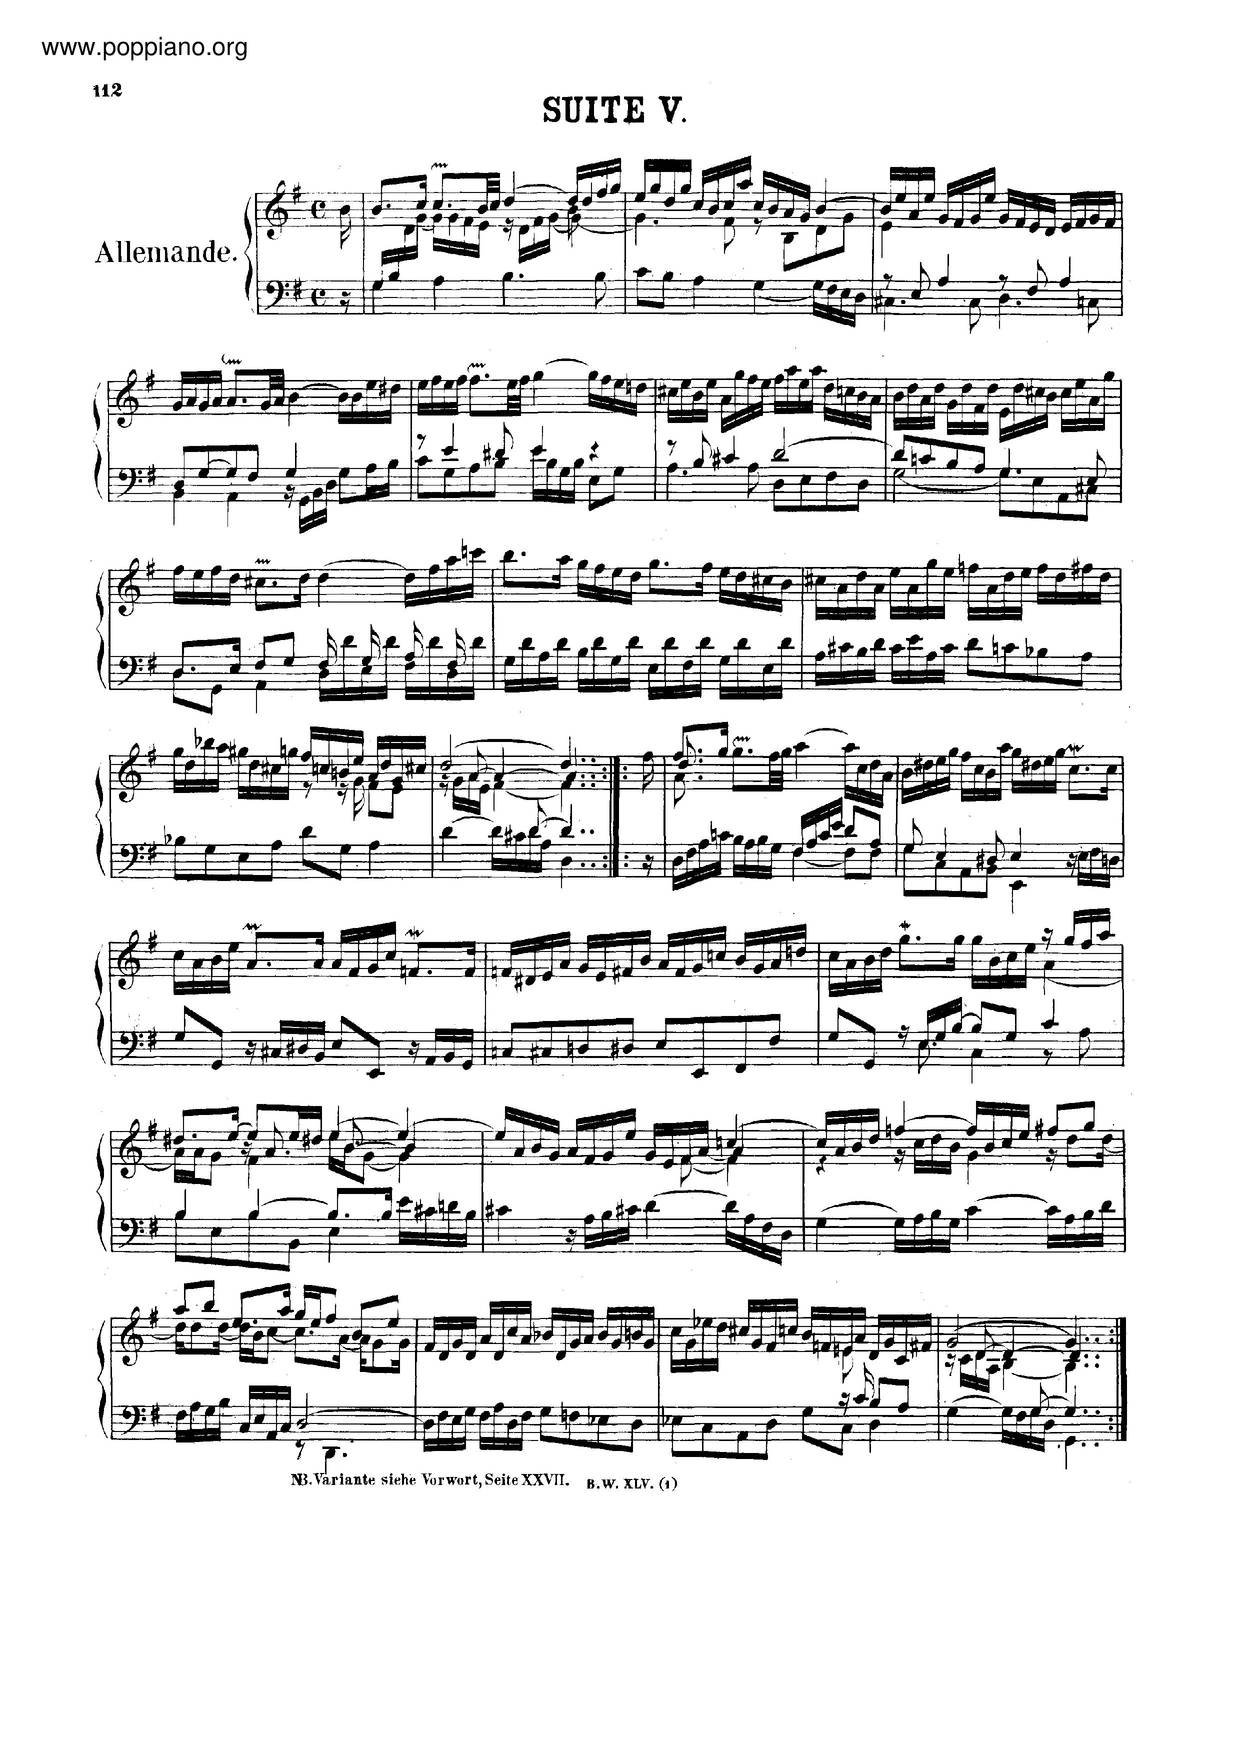 French Suite No. 5 In G Major, BWV 816琴谱